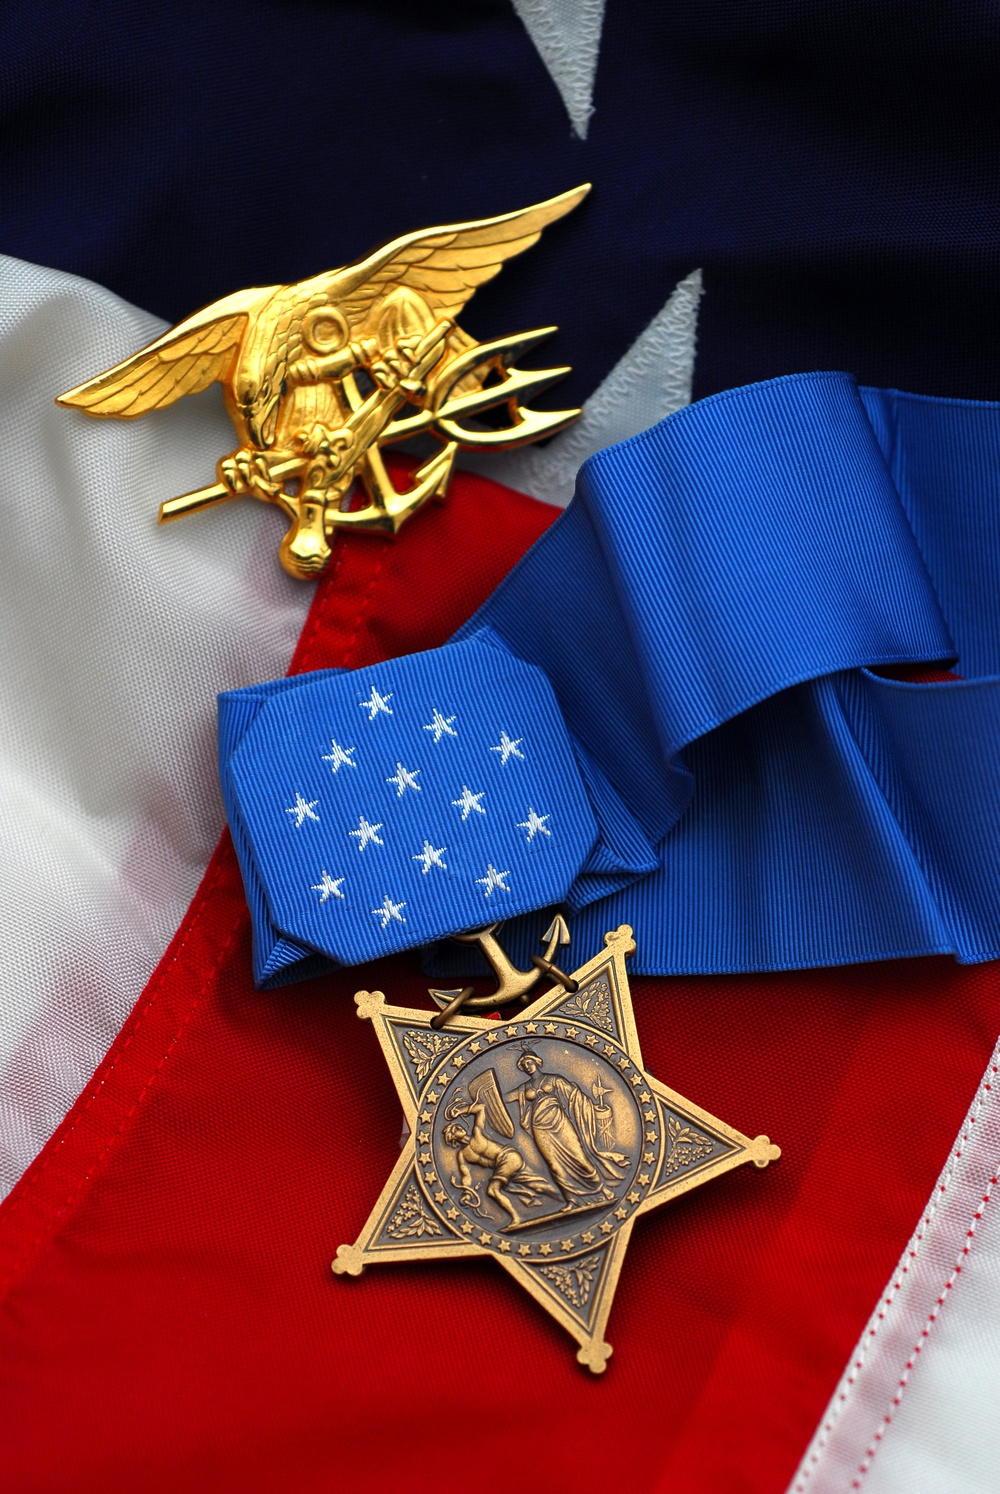 Dvids Images Navy Seal Receives Medal Of Honor Image 3 Of 4